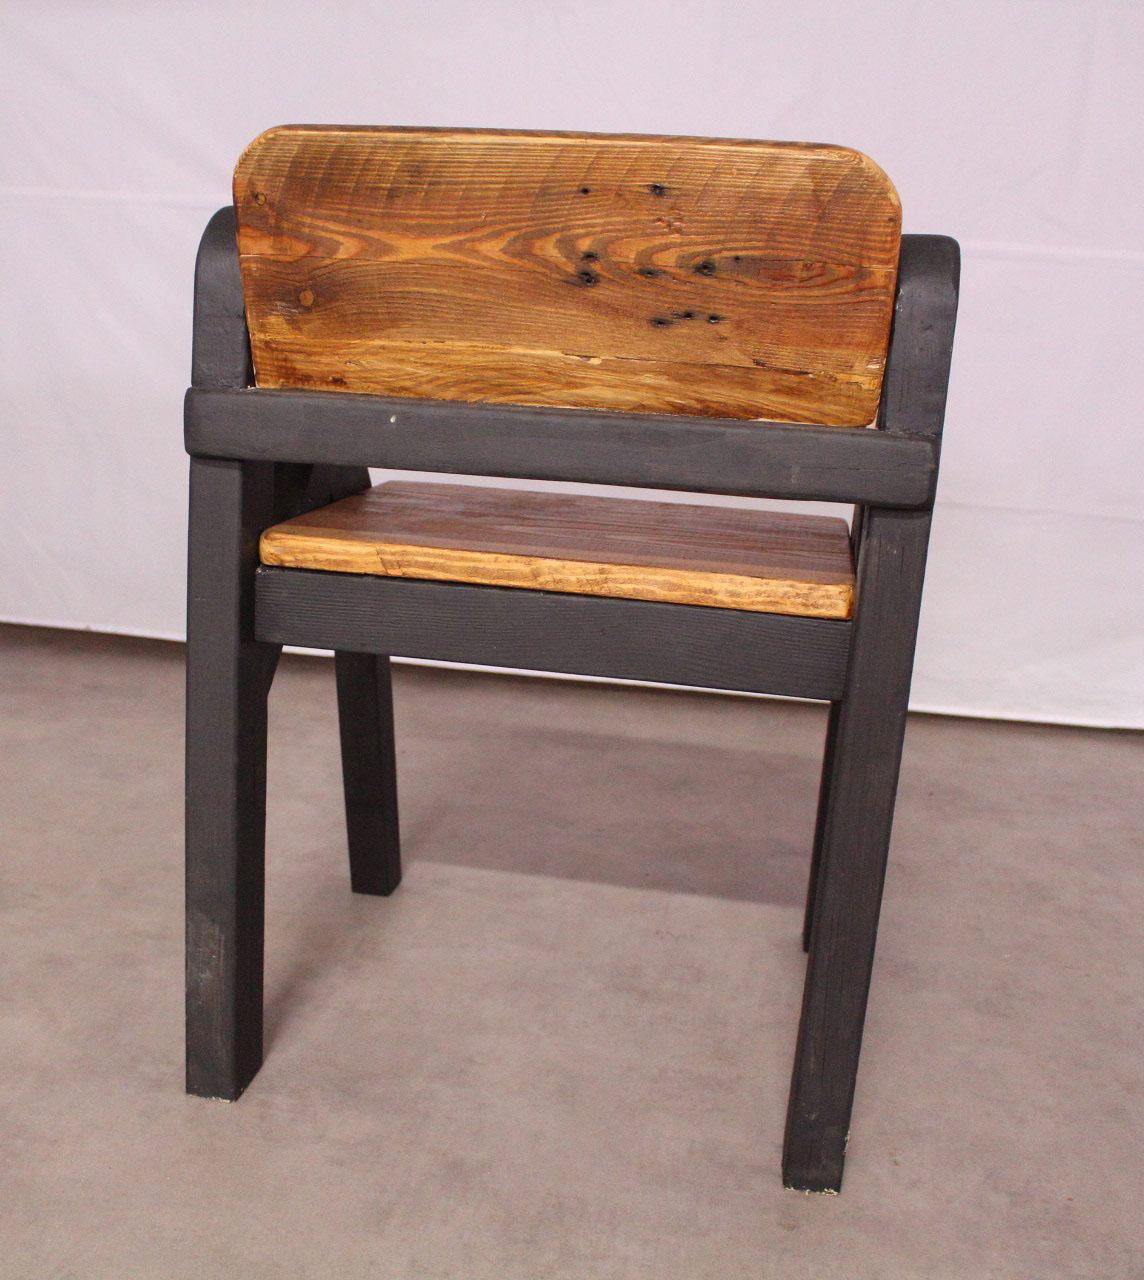 Wood French Artisan Made Chair One of a Kind Late 20th Century Brutalist Folk Art